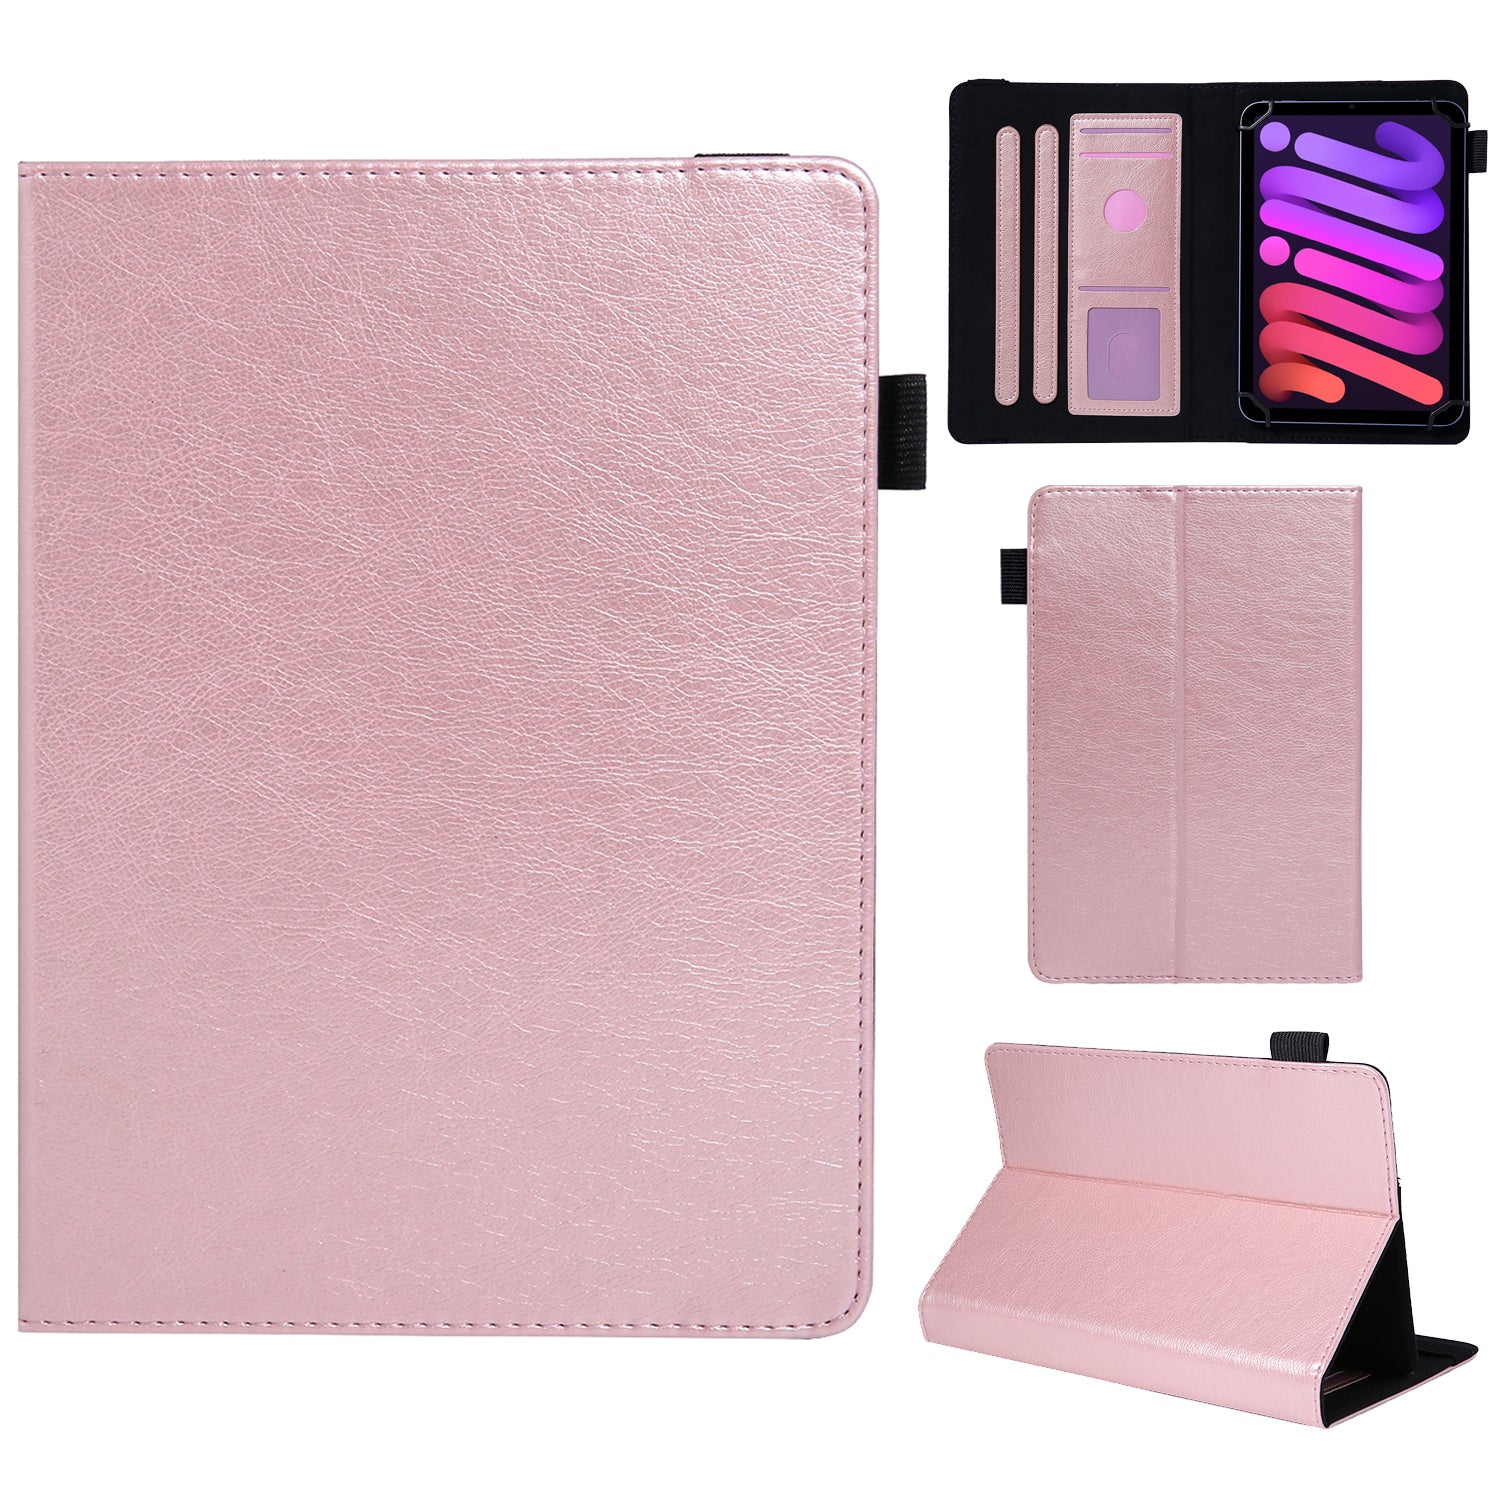 7-inch Tablet Leather Case Card Slots Stand Protective Cover - Rose Gold